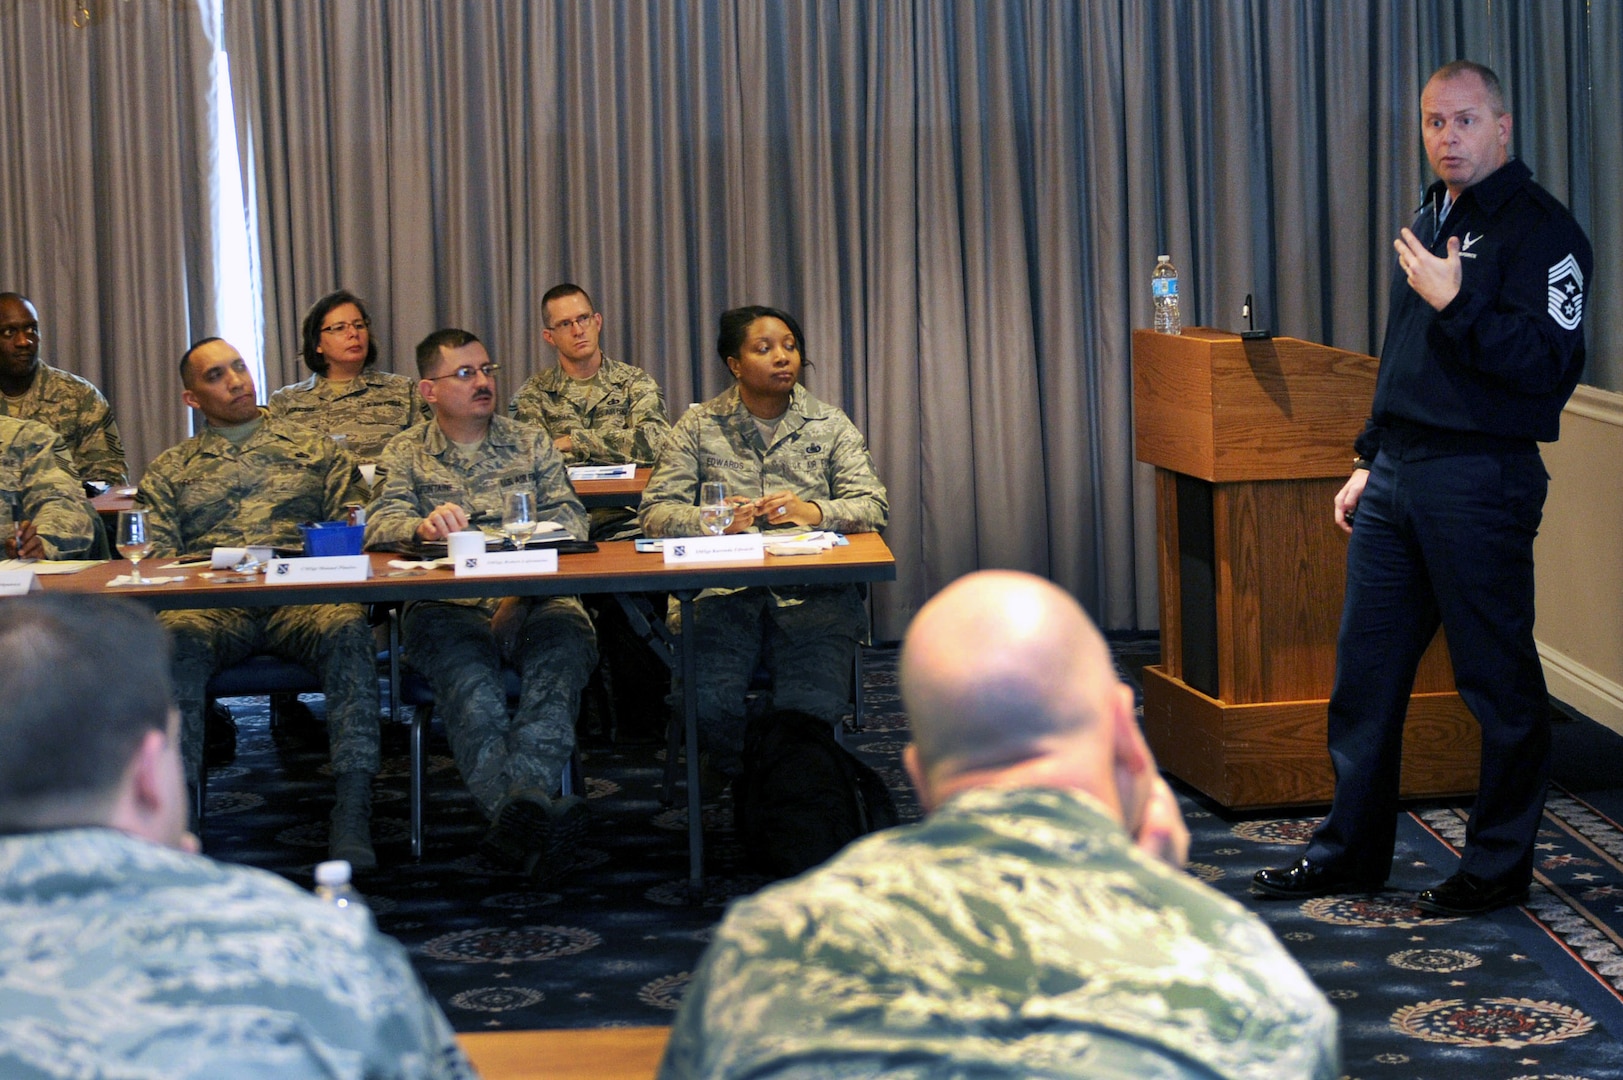 Chief Master Sgt. James Hotaling, command chief master sergeant of the Air National Guard, speaks with newly minted Air Force chief master sergeants attending the Air Force District of Washington Chief’s Orientation and Recognition Ceremony at Joint Base Anacostia-Bolling, Washington, D.C., Feb. 6, 2014.